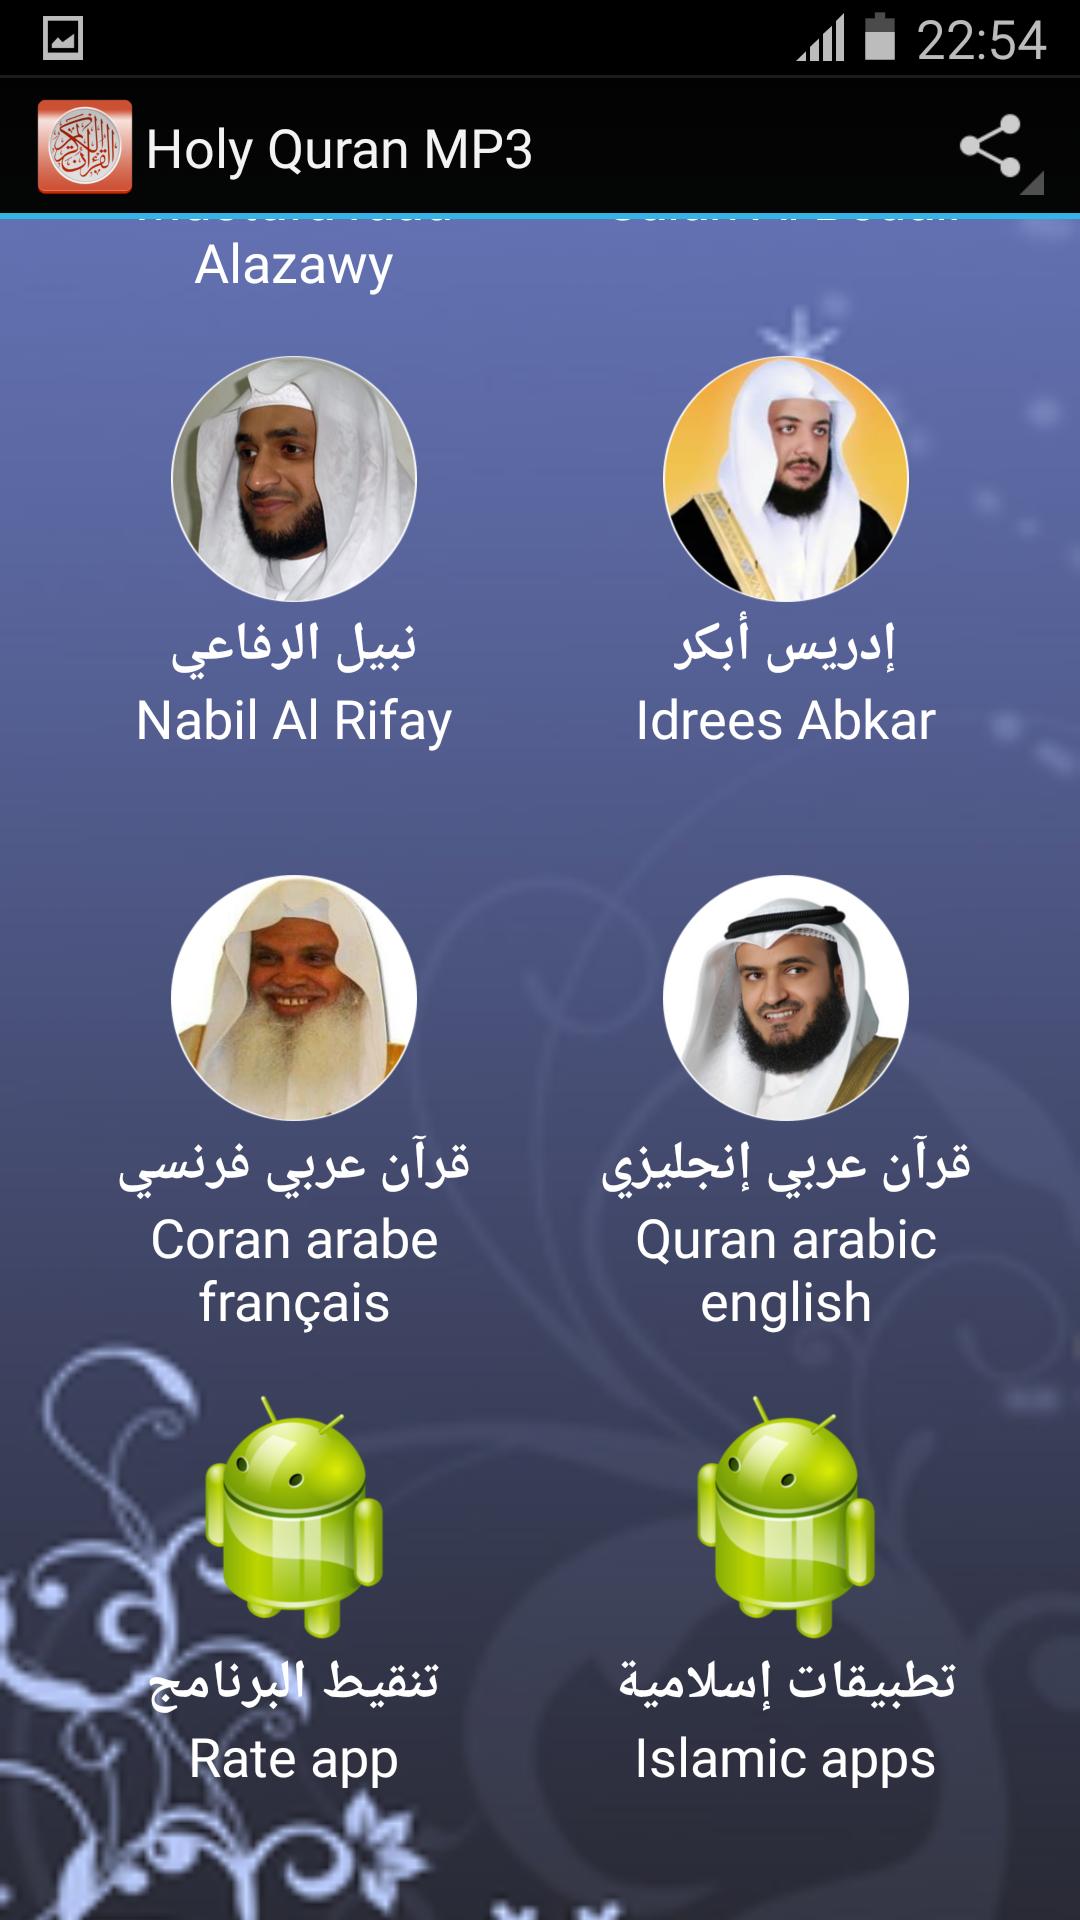 Holy Quran karim mp3 for Android - APK Download